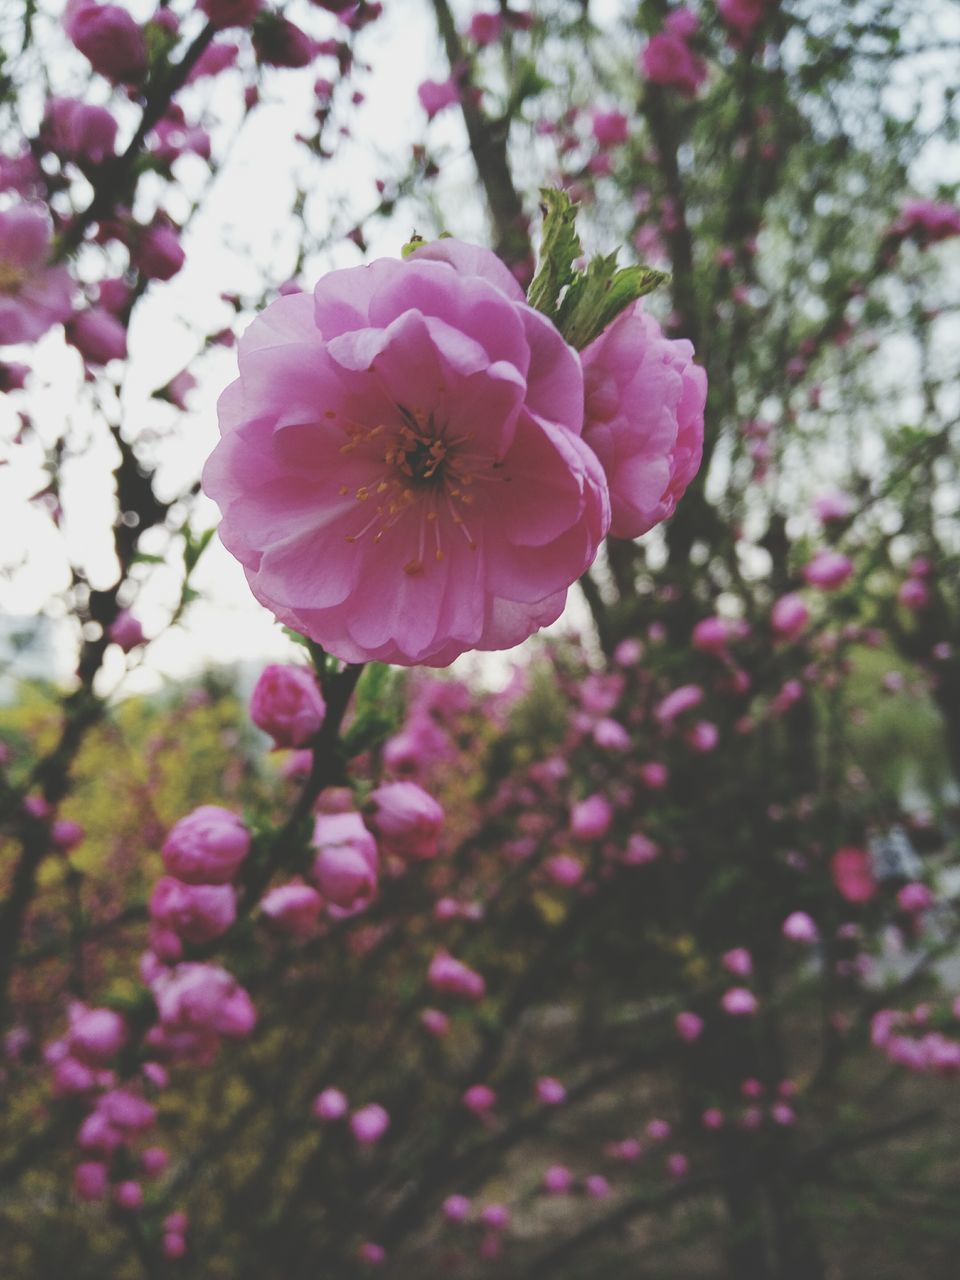 flower, freshness, growth, fragility, petal, beauty in nature, pink color, focus on foreground, blooming, nature, flower head, close-up, in bloom, blossom, plant, tree, springtime, day, selective focus, outdoors